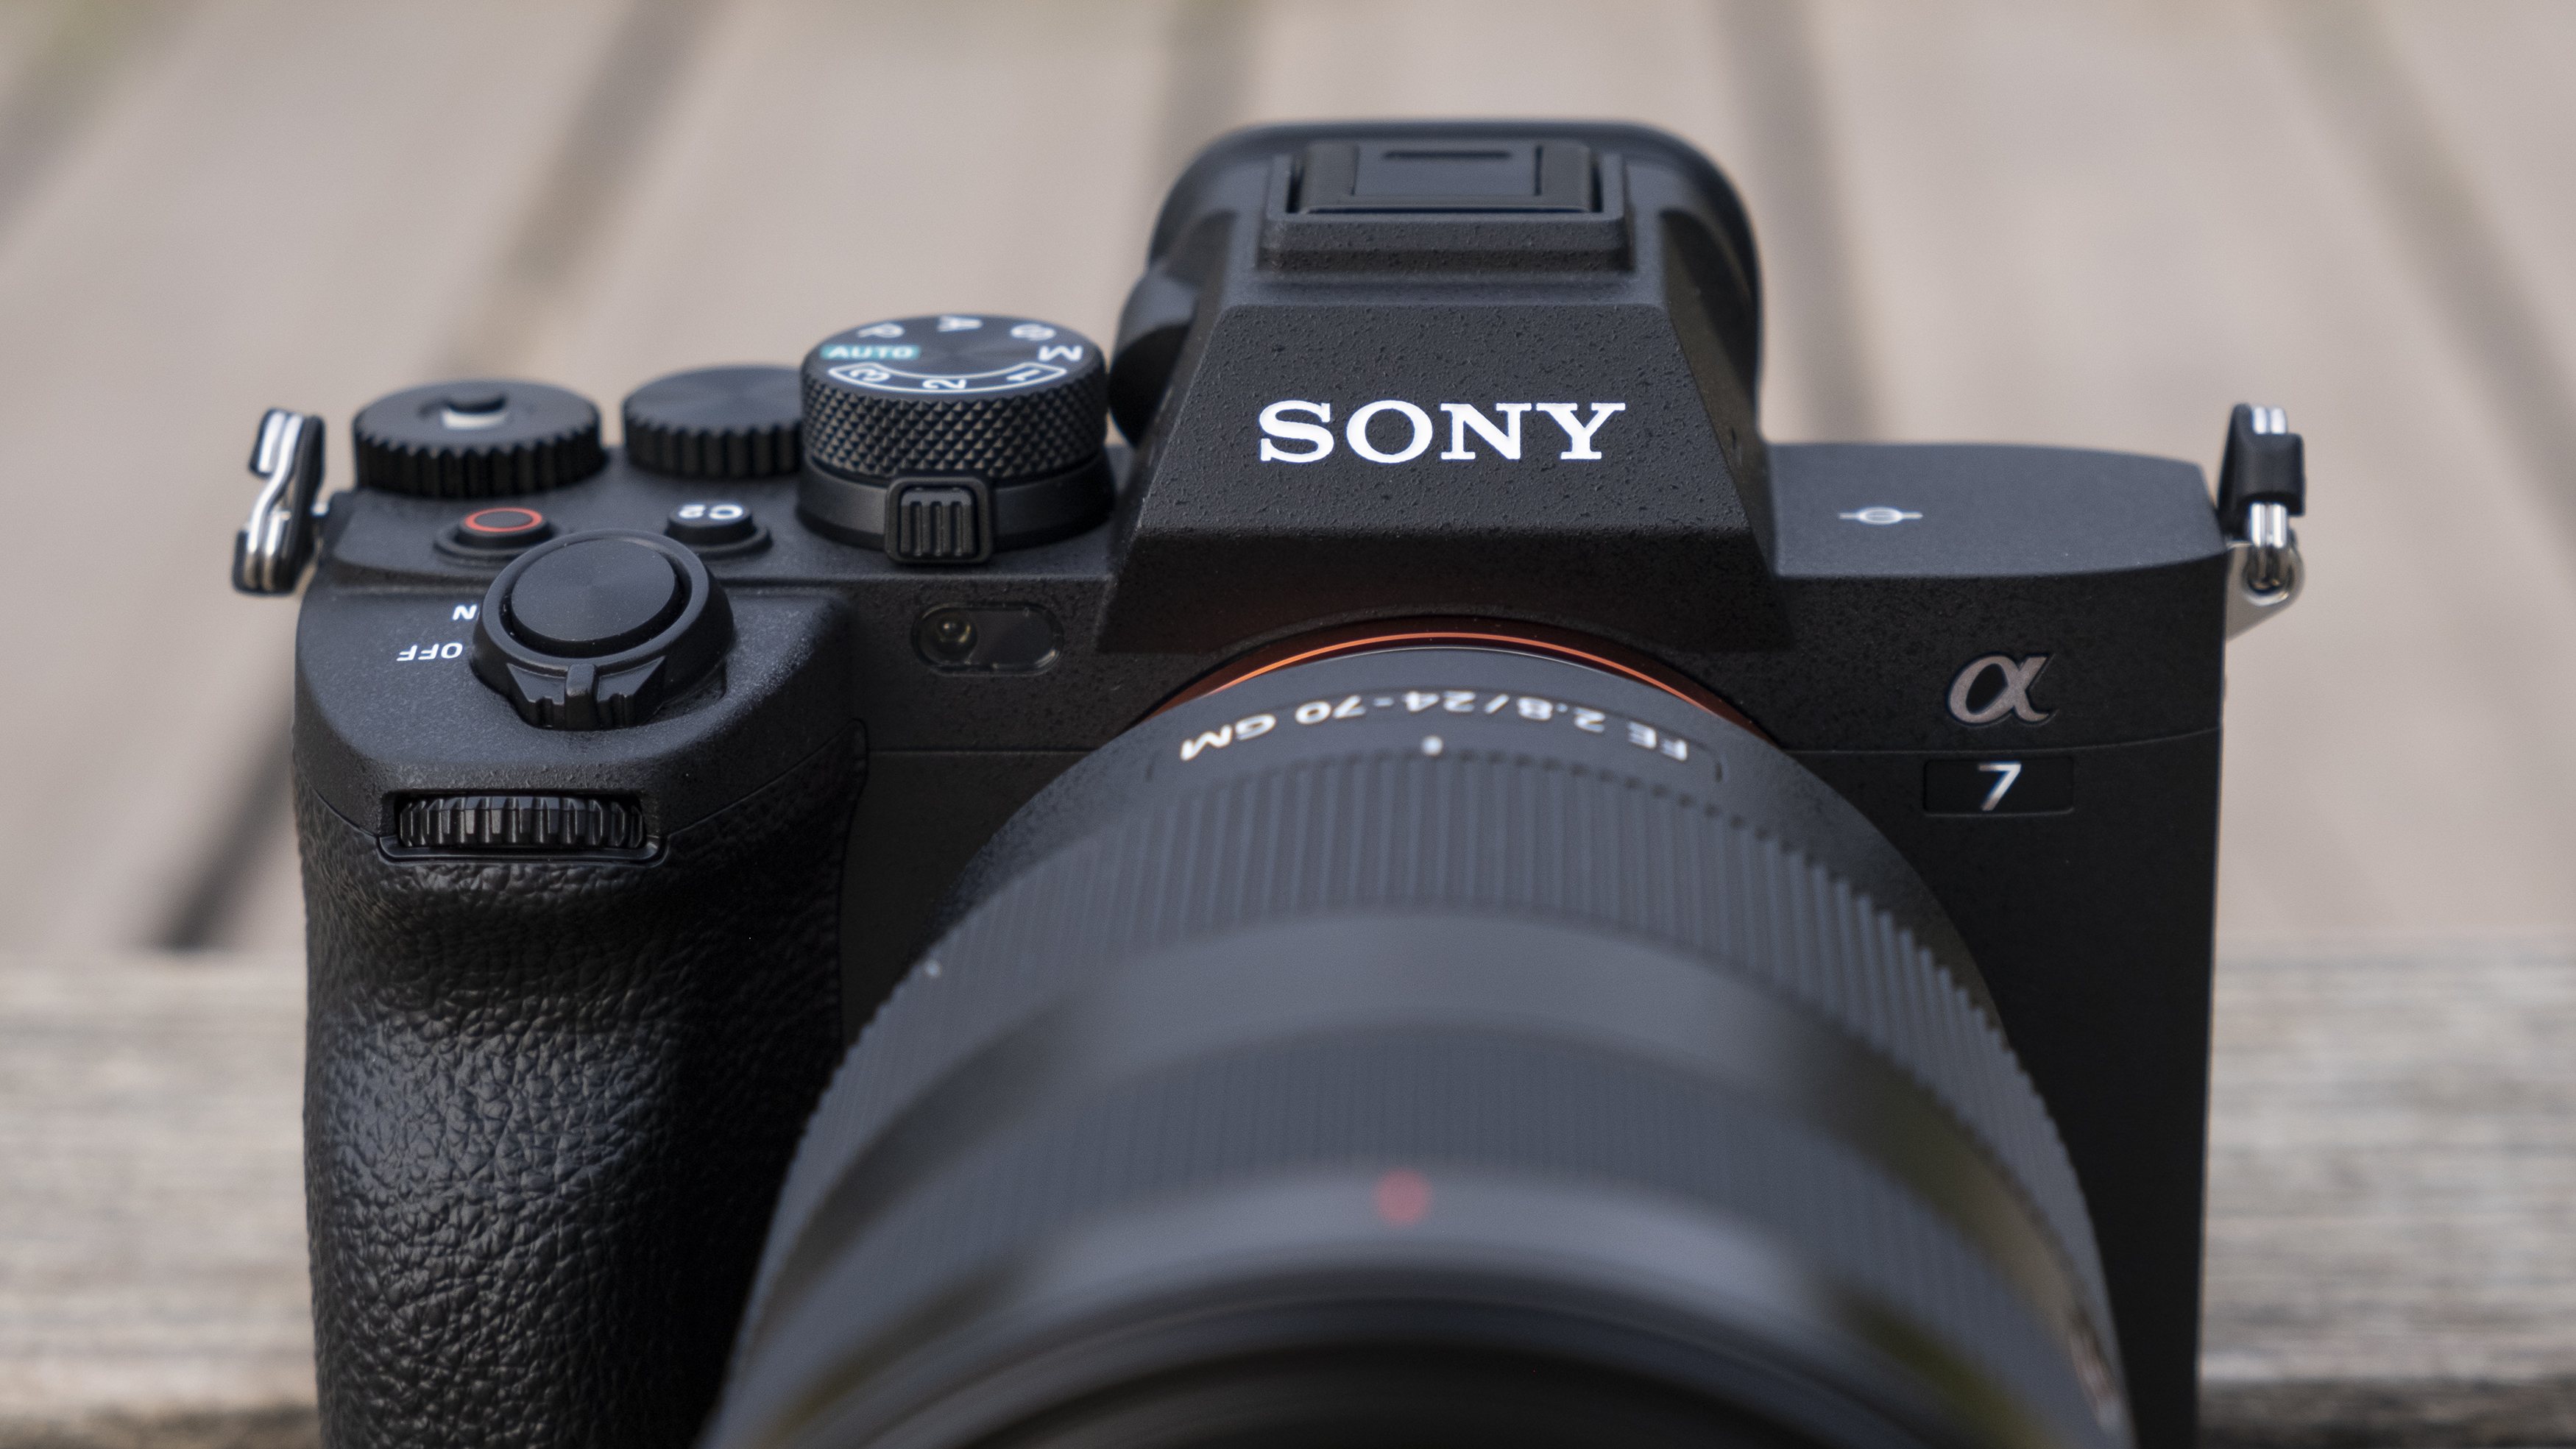 The front of the Sony A7 IV camera showing its viewfinder bump